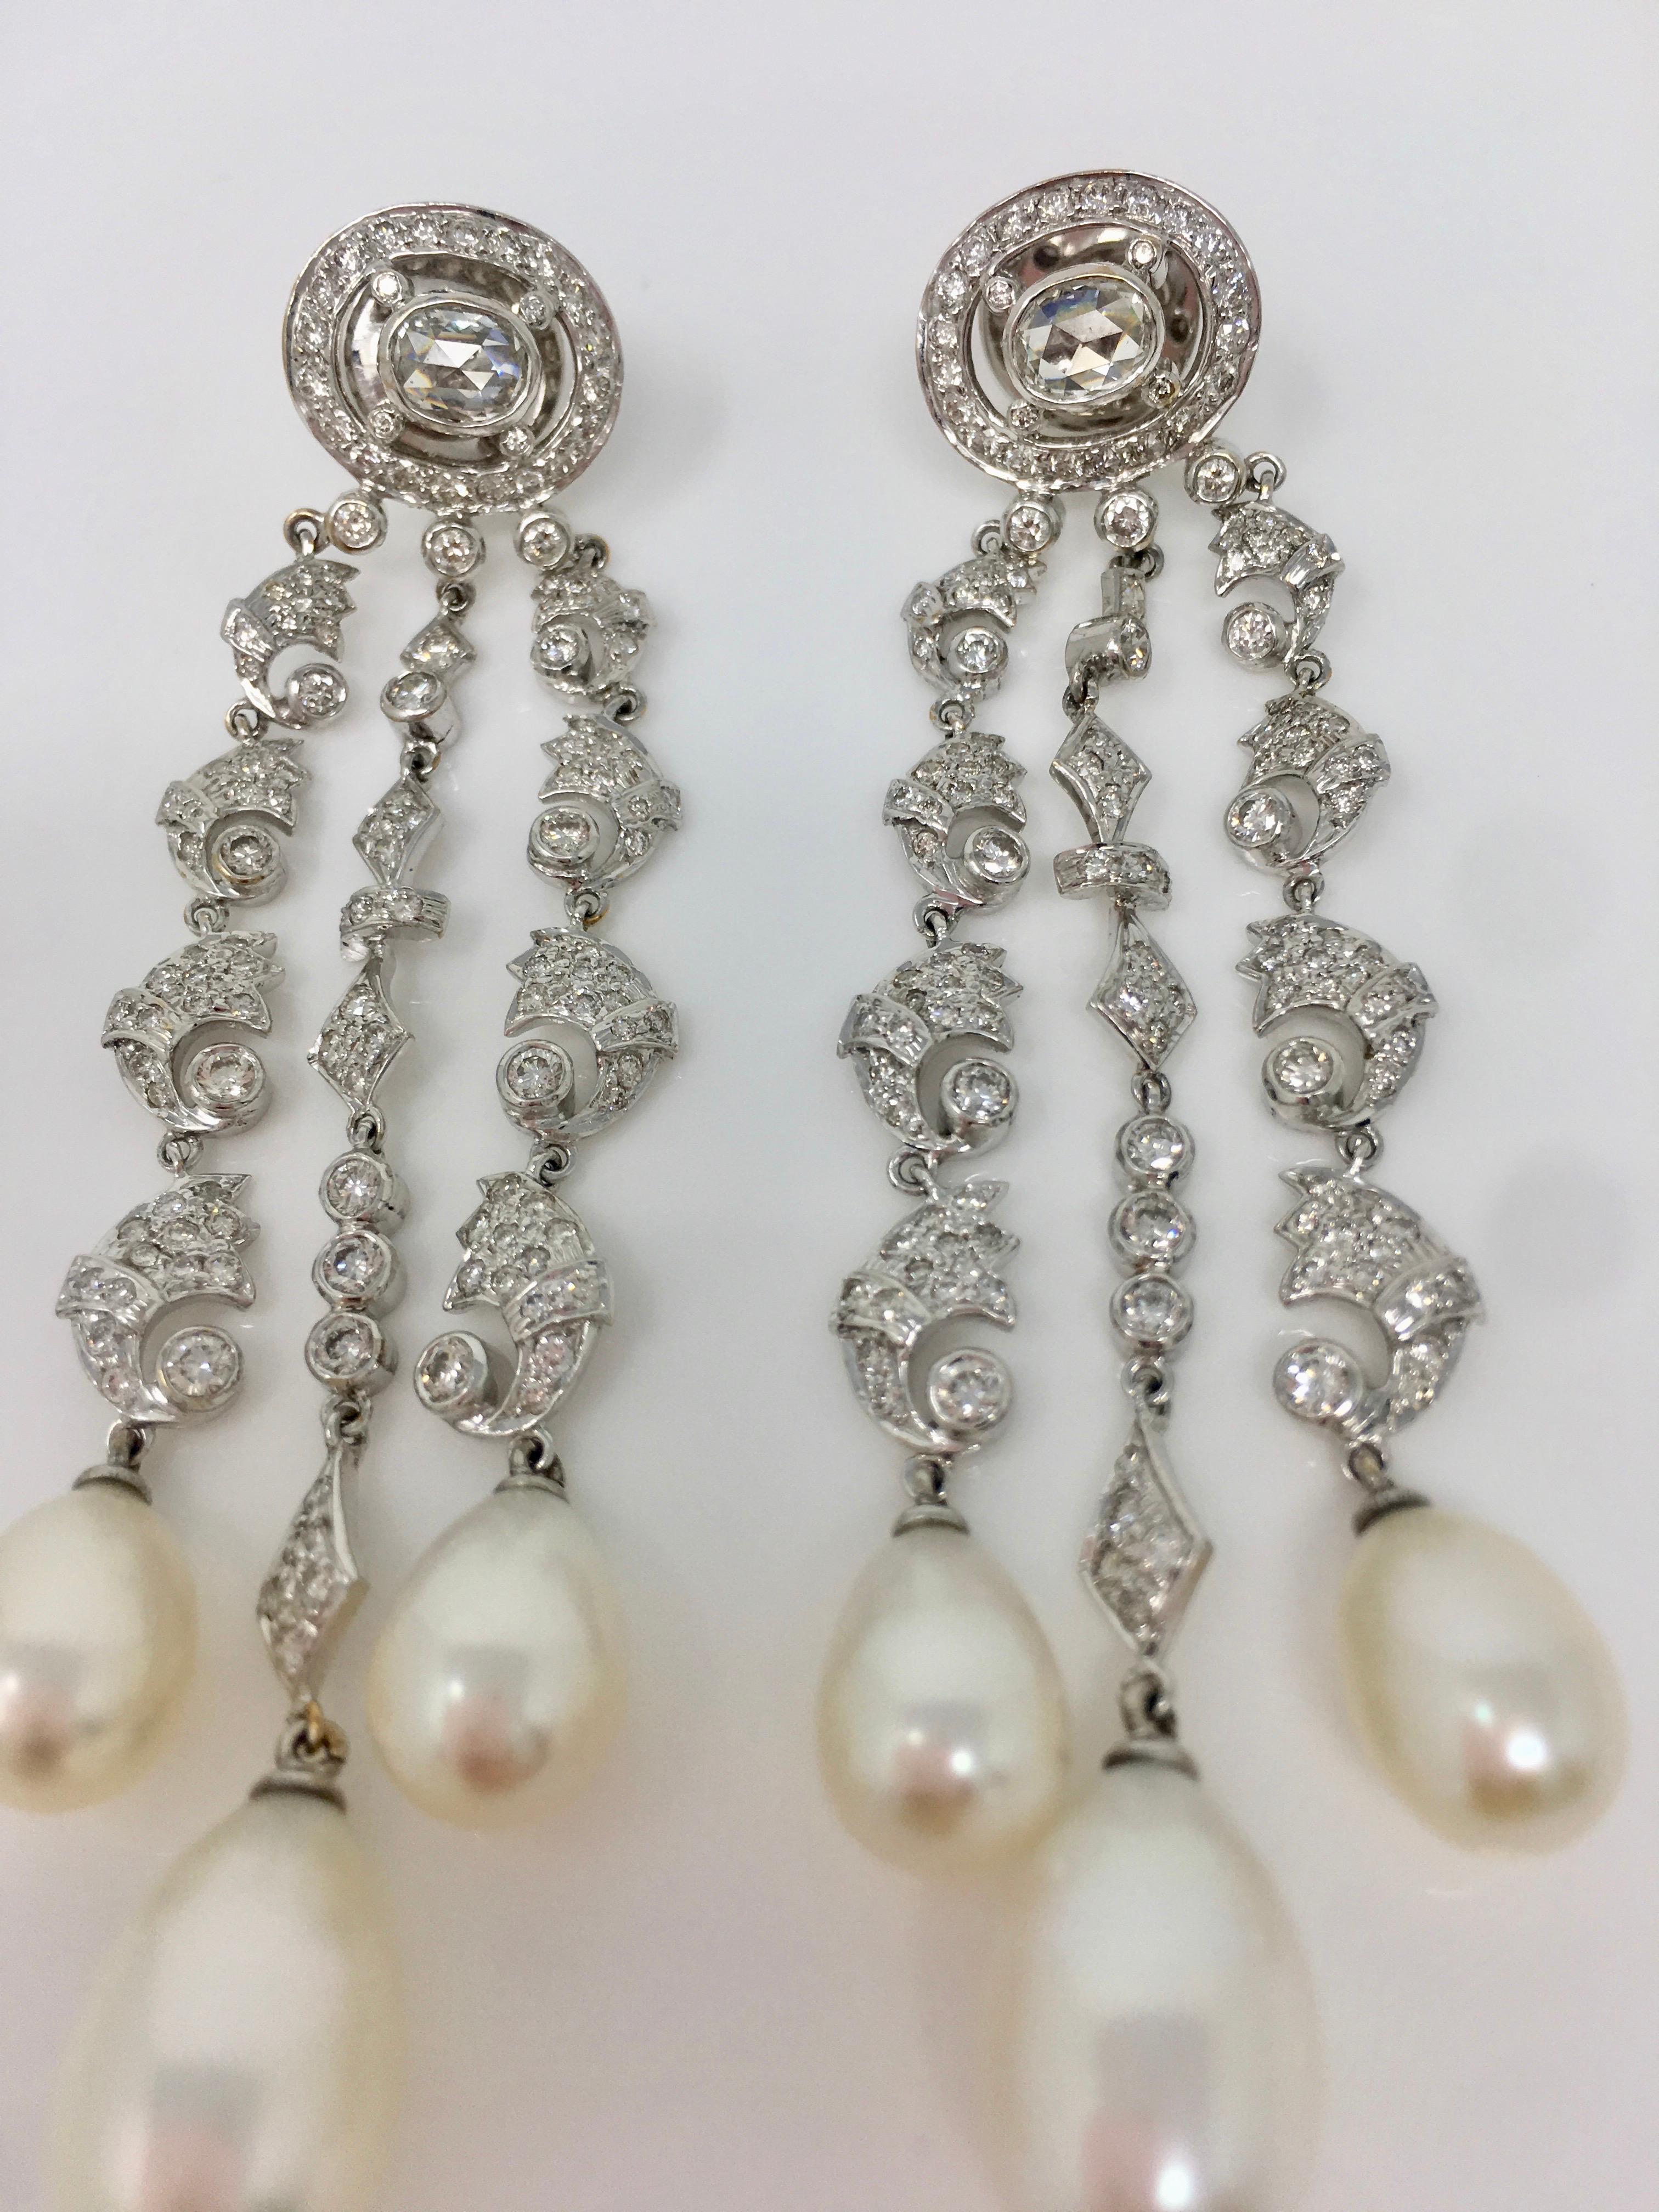 Round Cut White Round Brilliant Diamond And White South Sea Pearl Earrings In 18k Gold.  For Sale